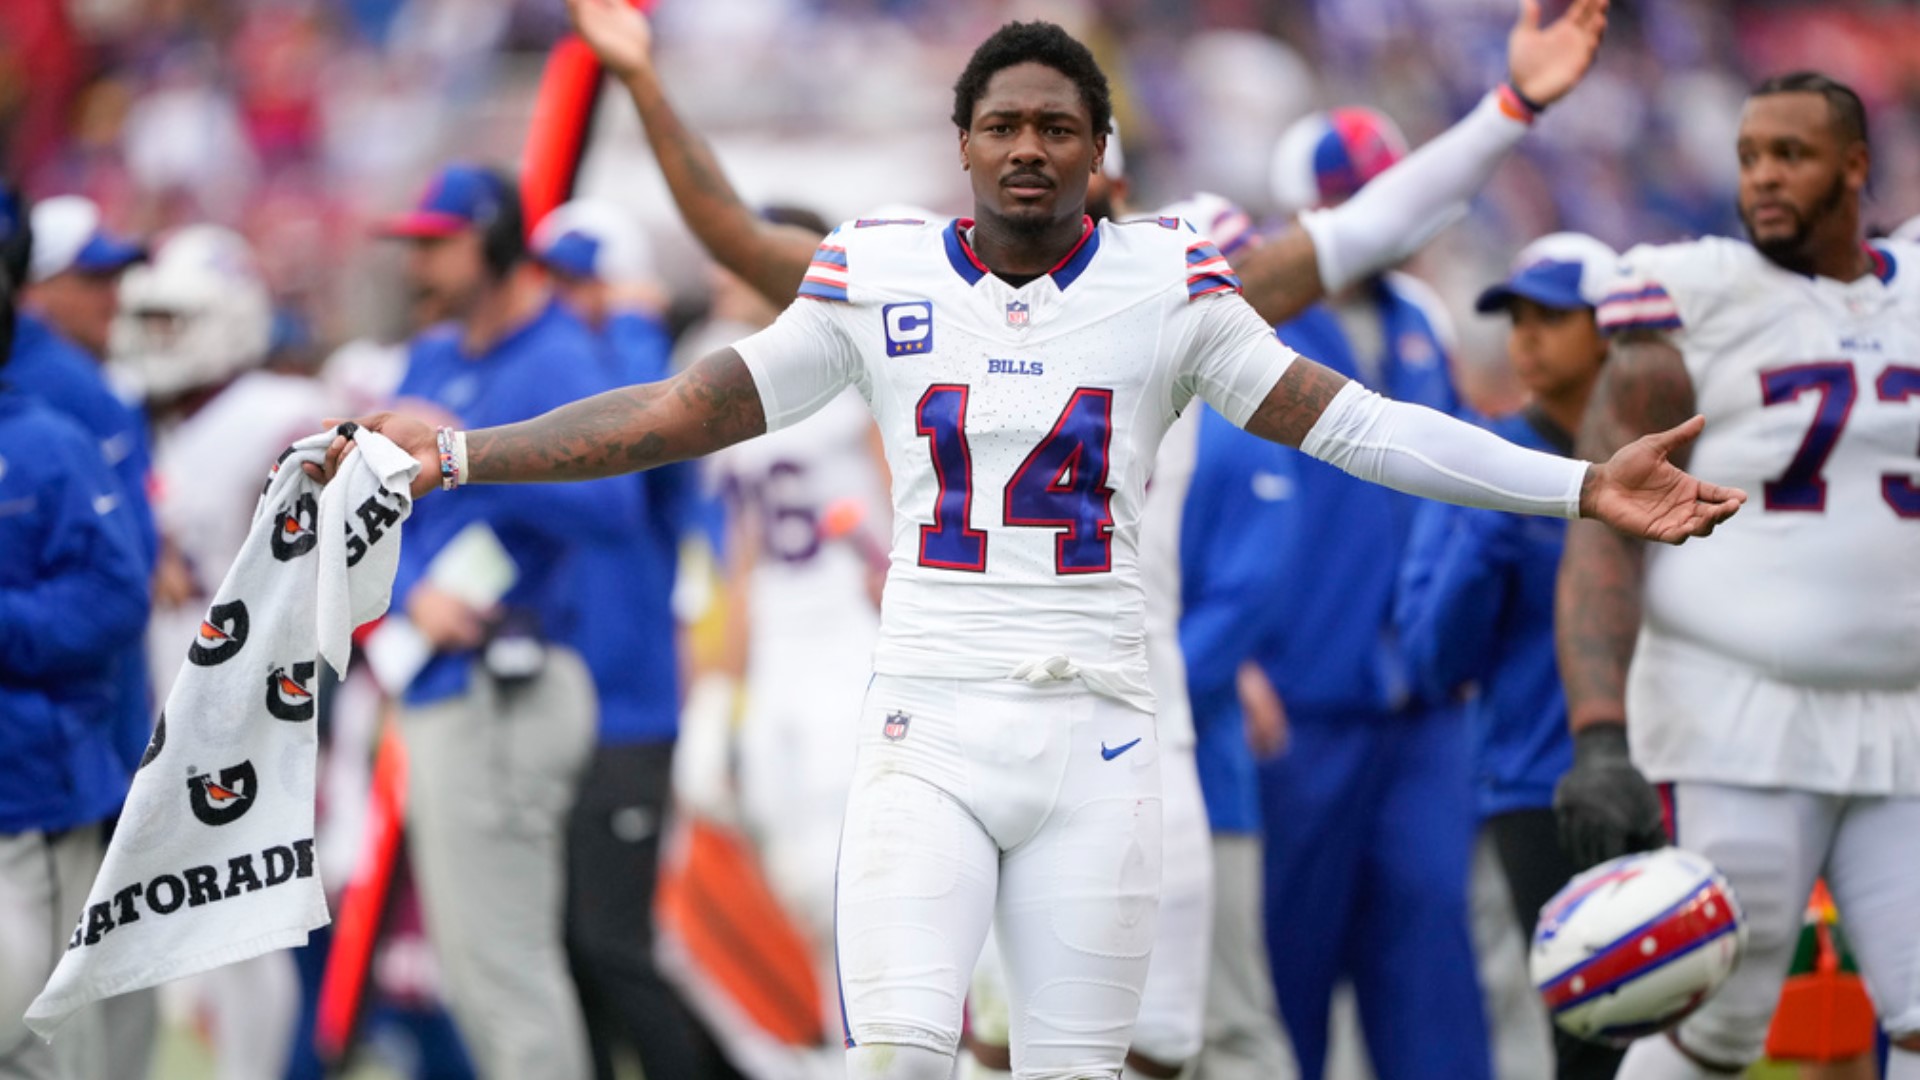 The Bills are still the team to beat in the AFC East, as they showed by  dominating Miami